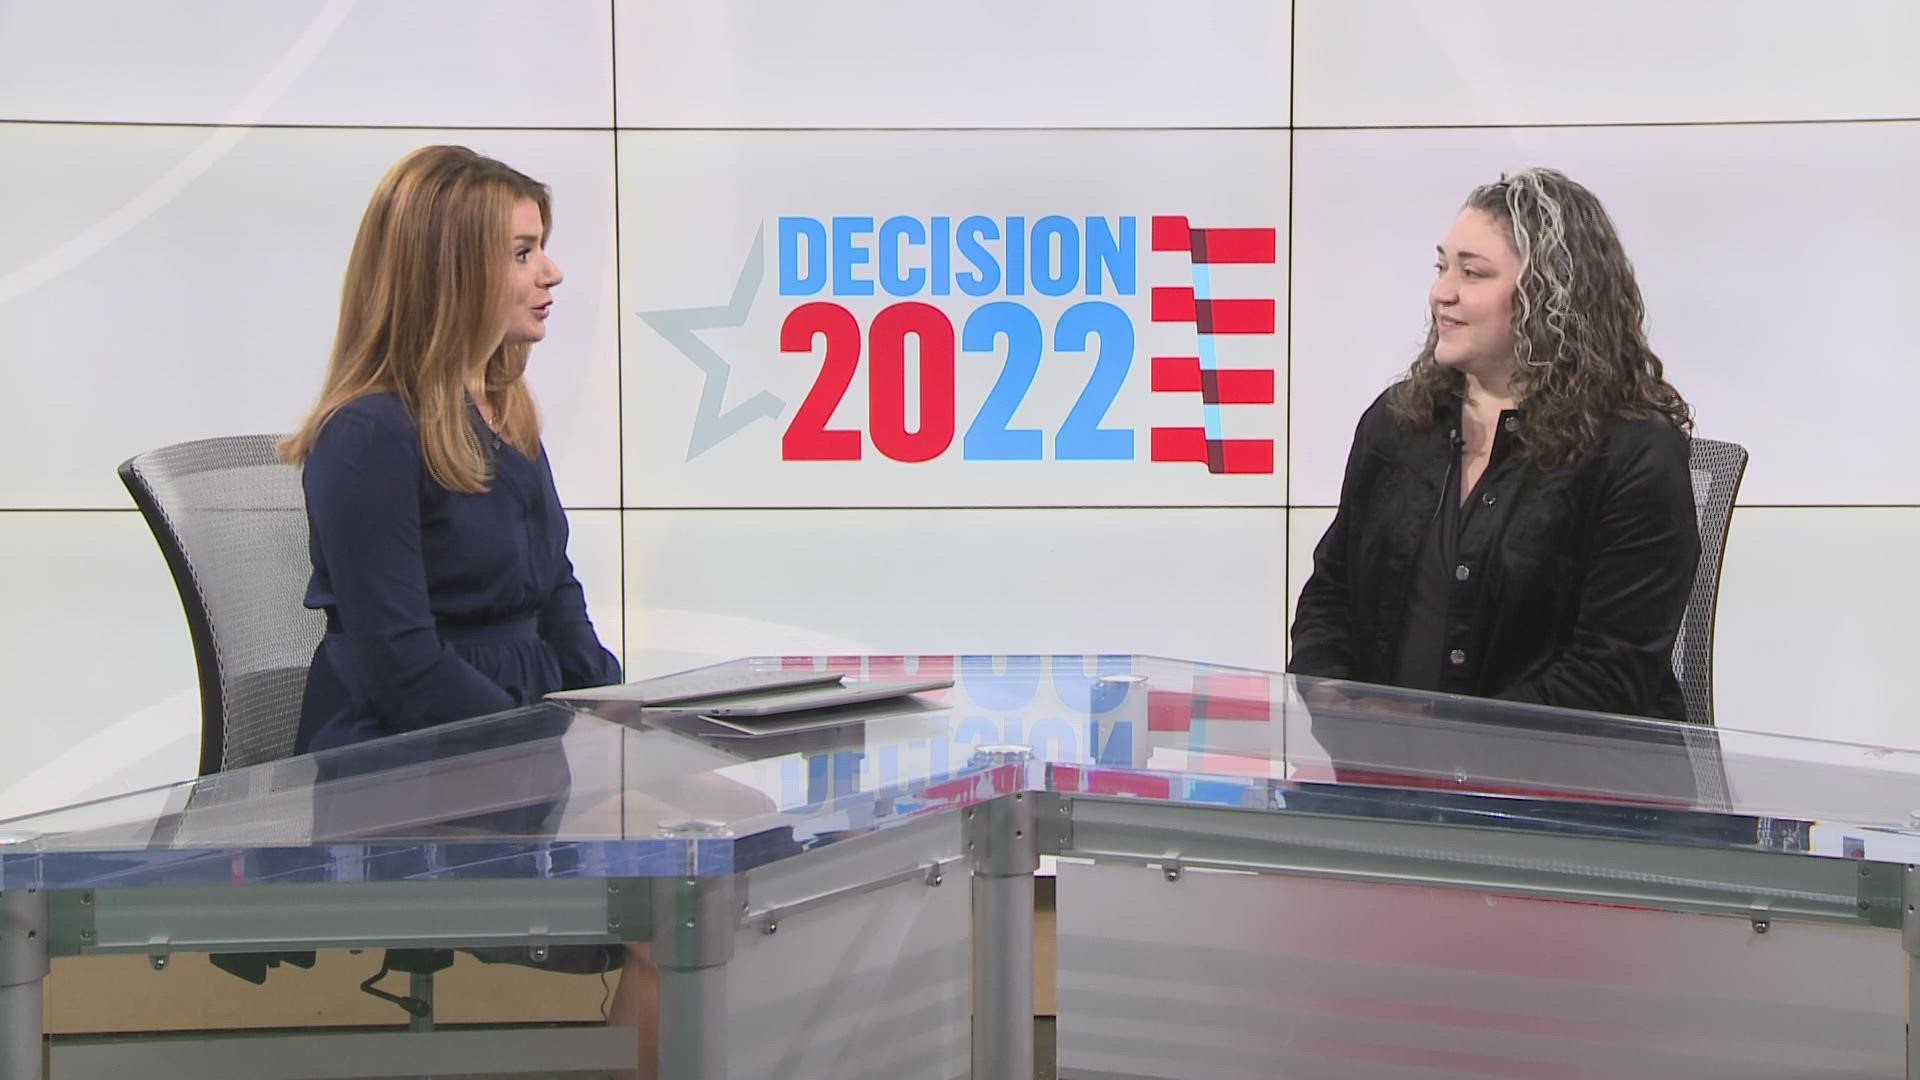 University of Akron Professor Dr. Cherie Strachan discusses why abortion/reproductive rights were one of the key issues driving voters out for the midterm election.